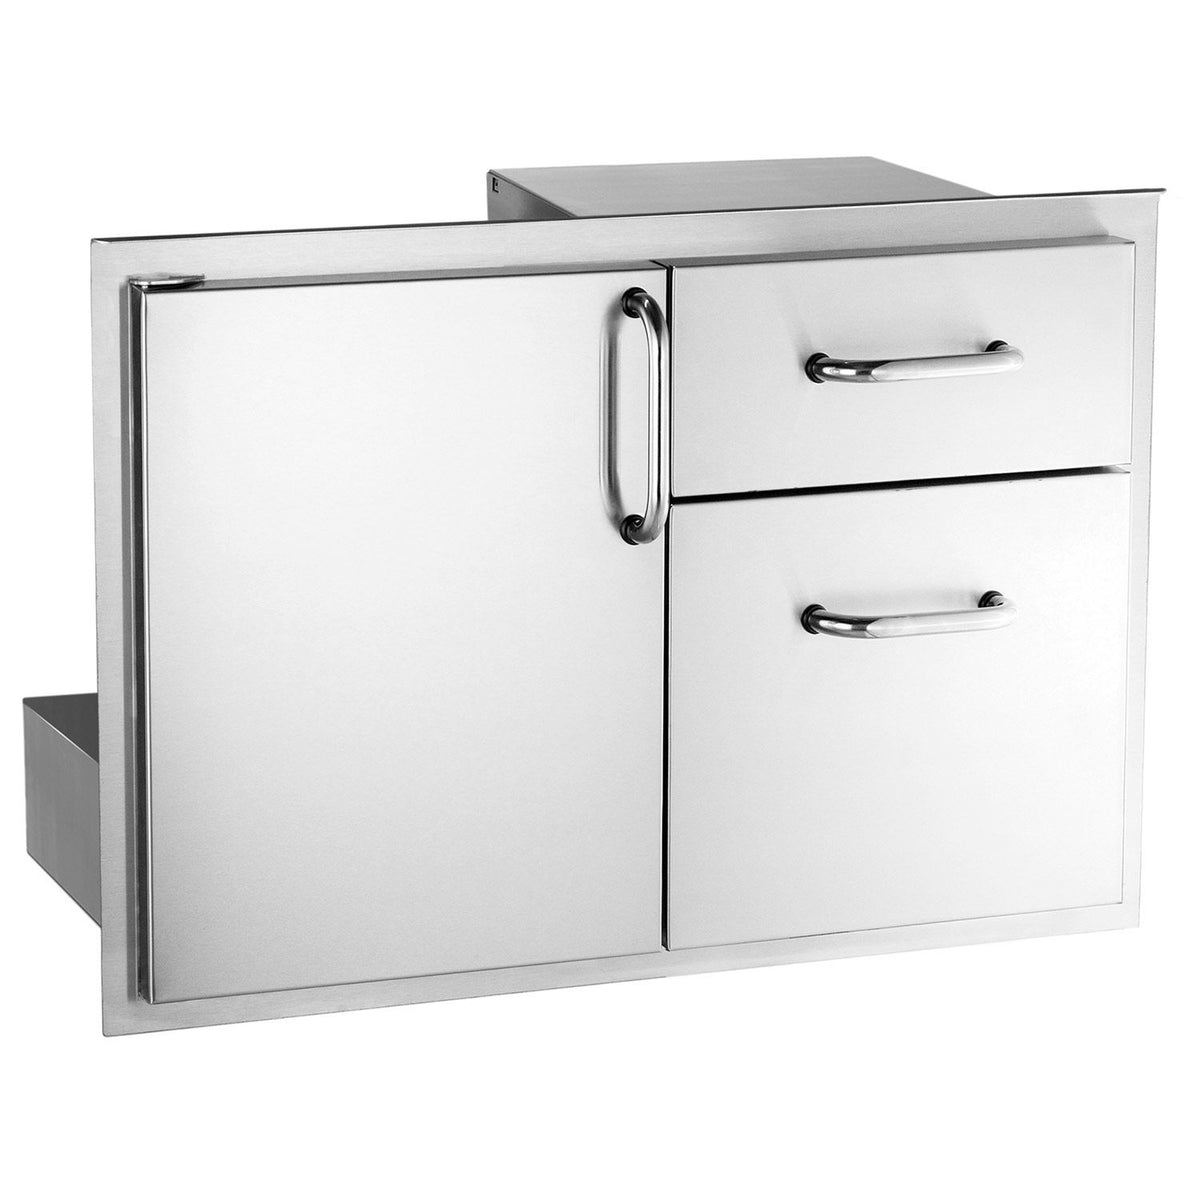 Fire Magic Select 30 Inch Access Door and Double Drawers